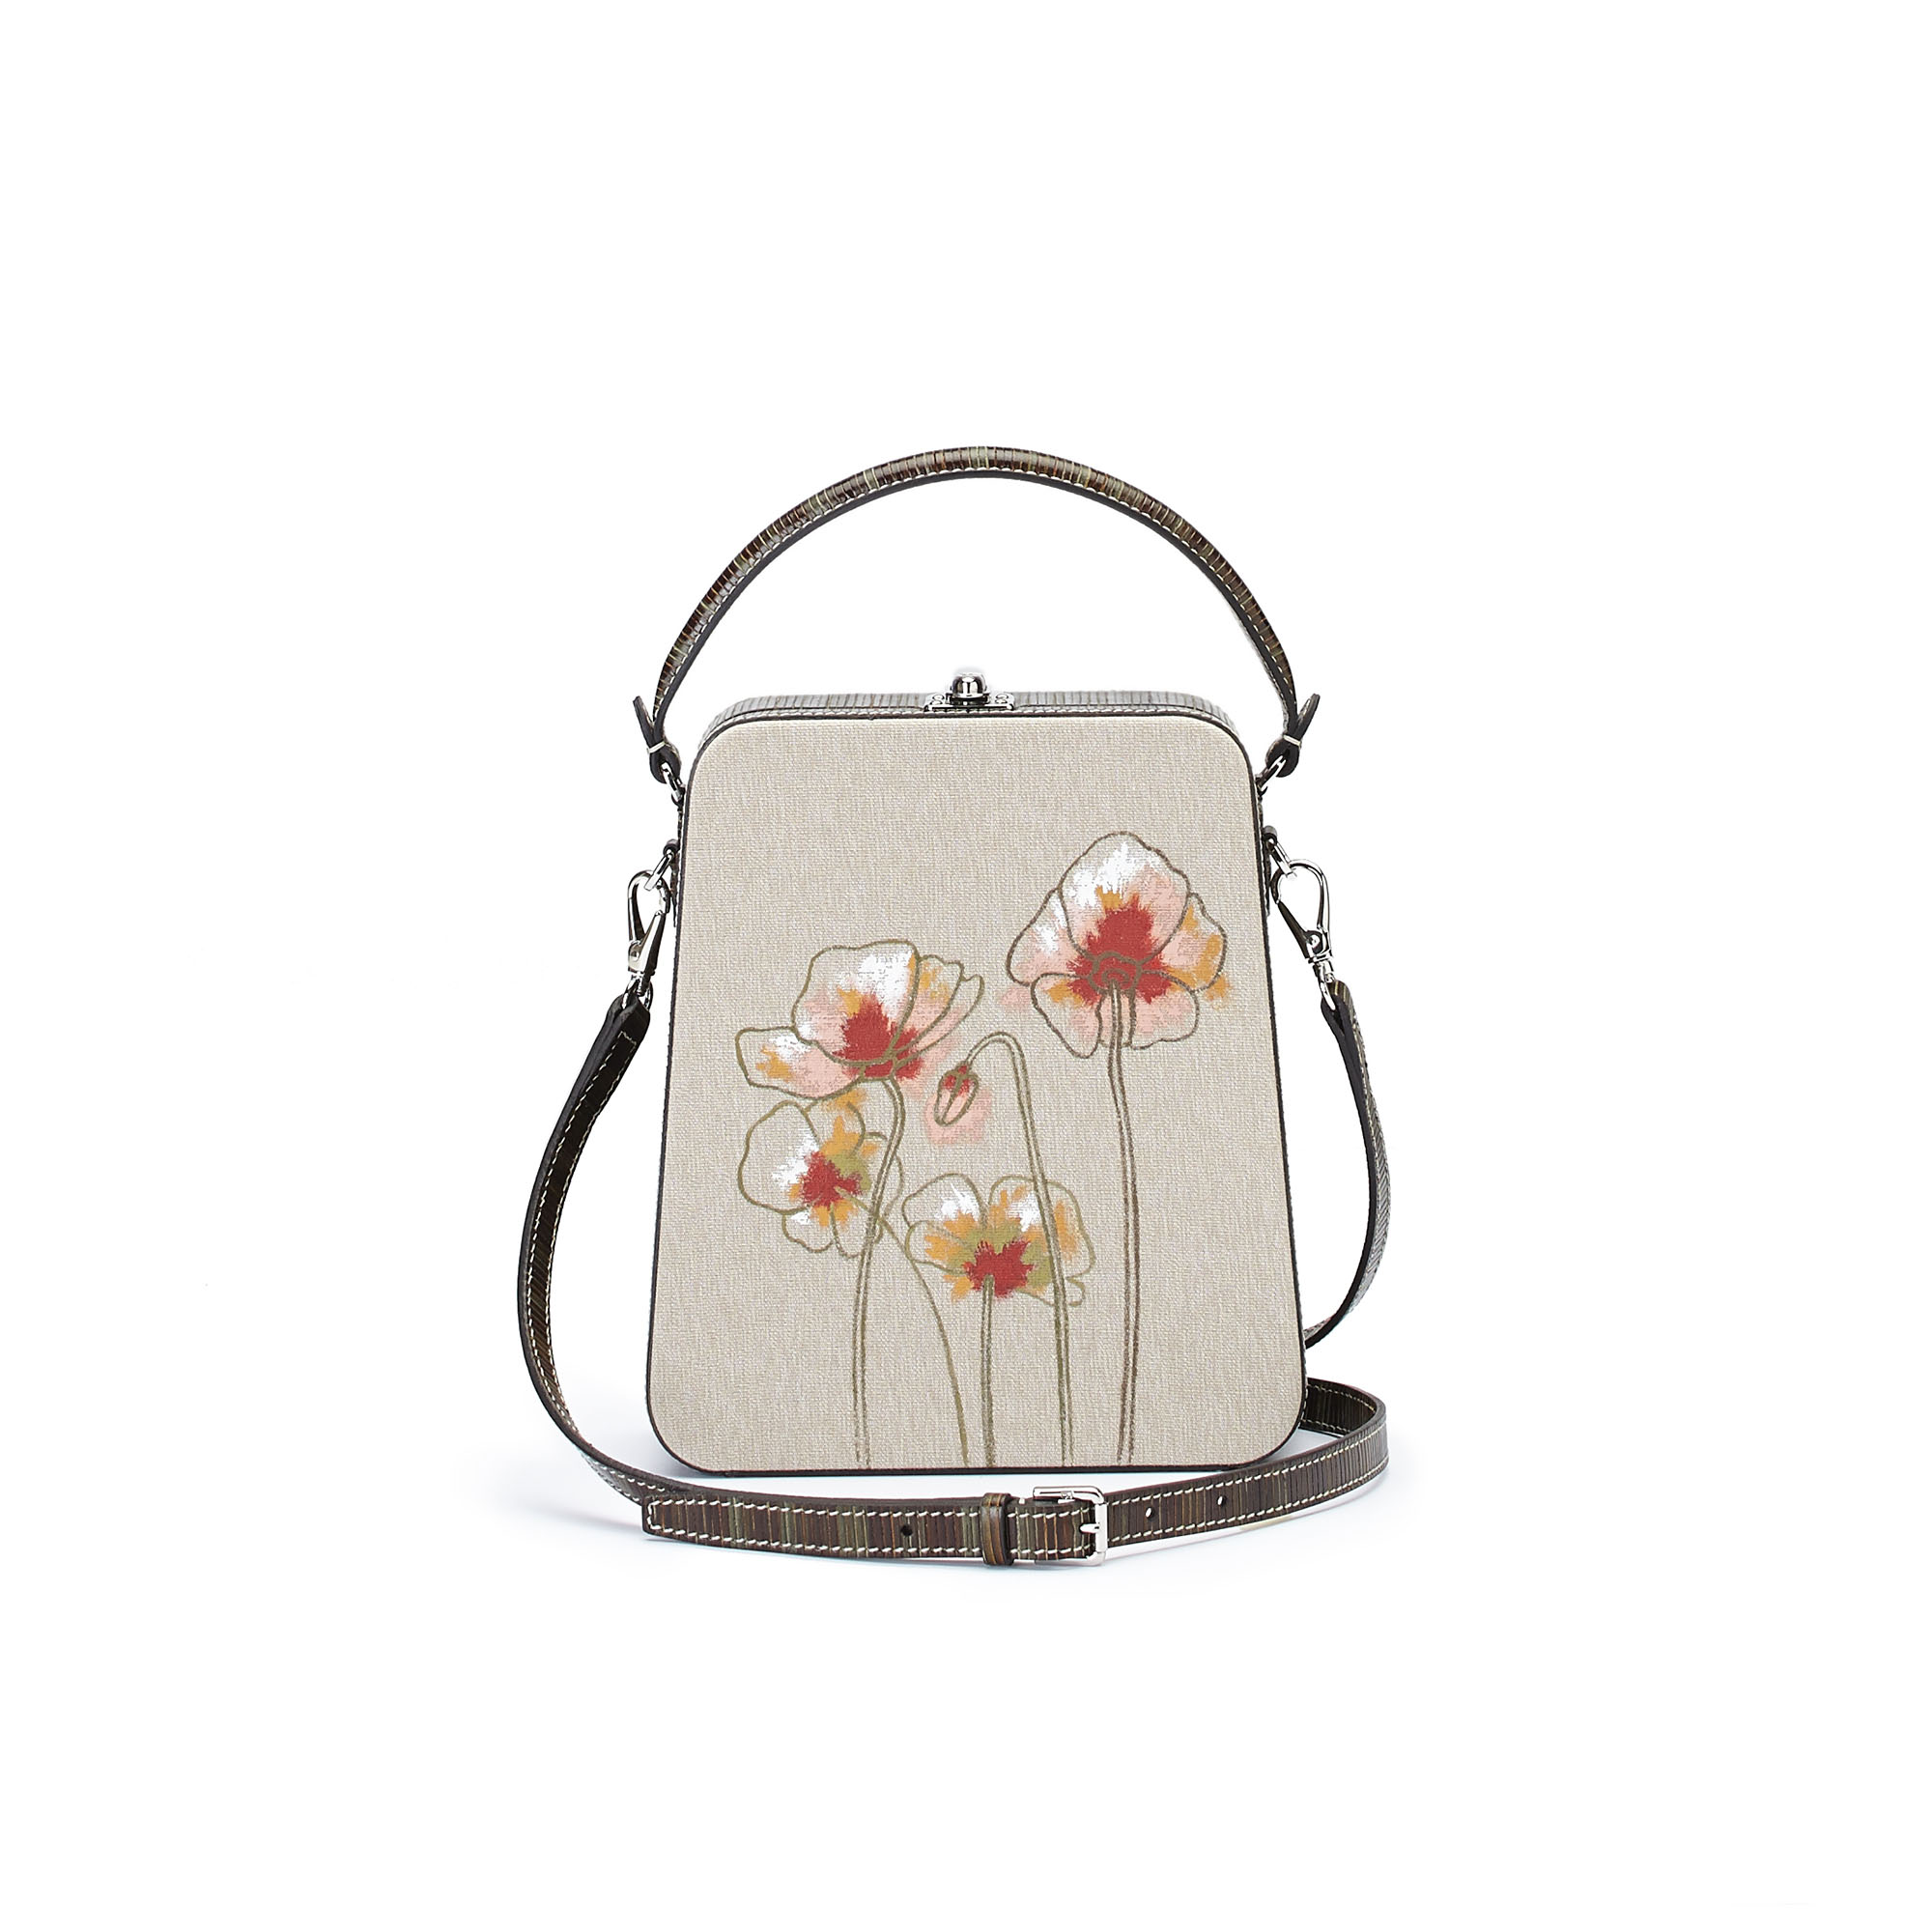 The military green with Poppy flowers wood leather canvas Tall Bertoncina bag by Bertoni 1949 03